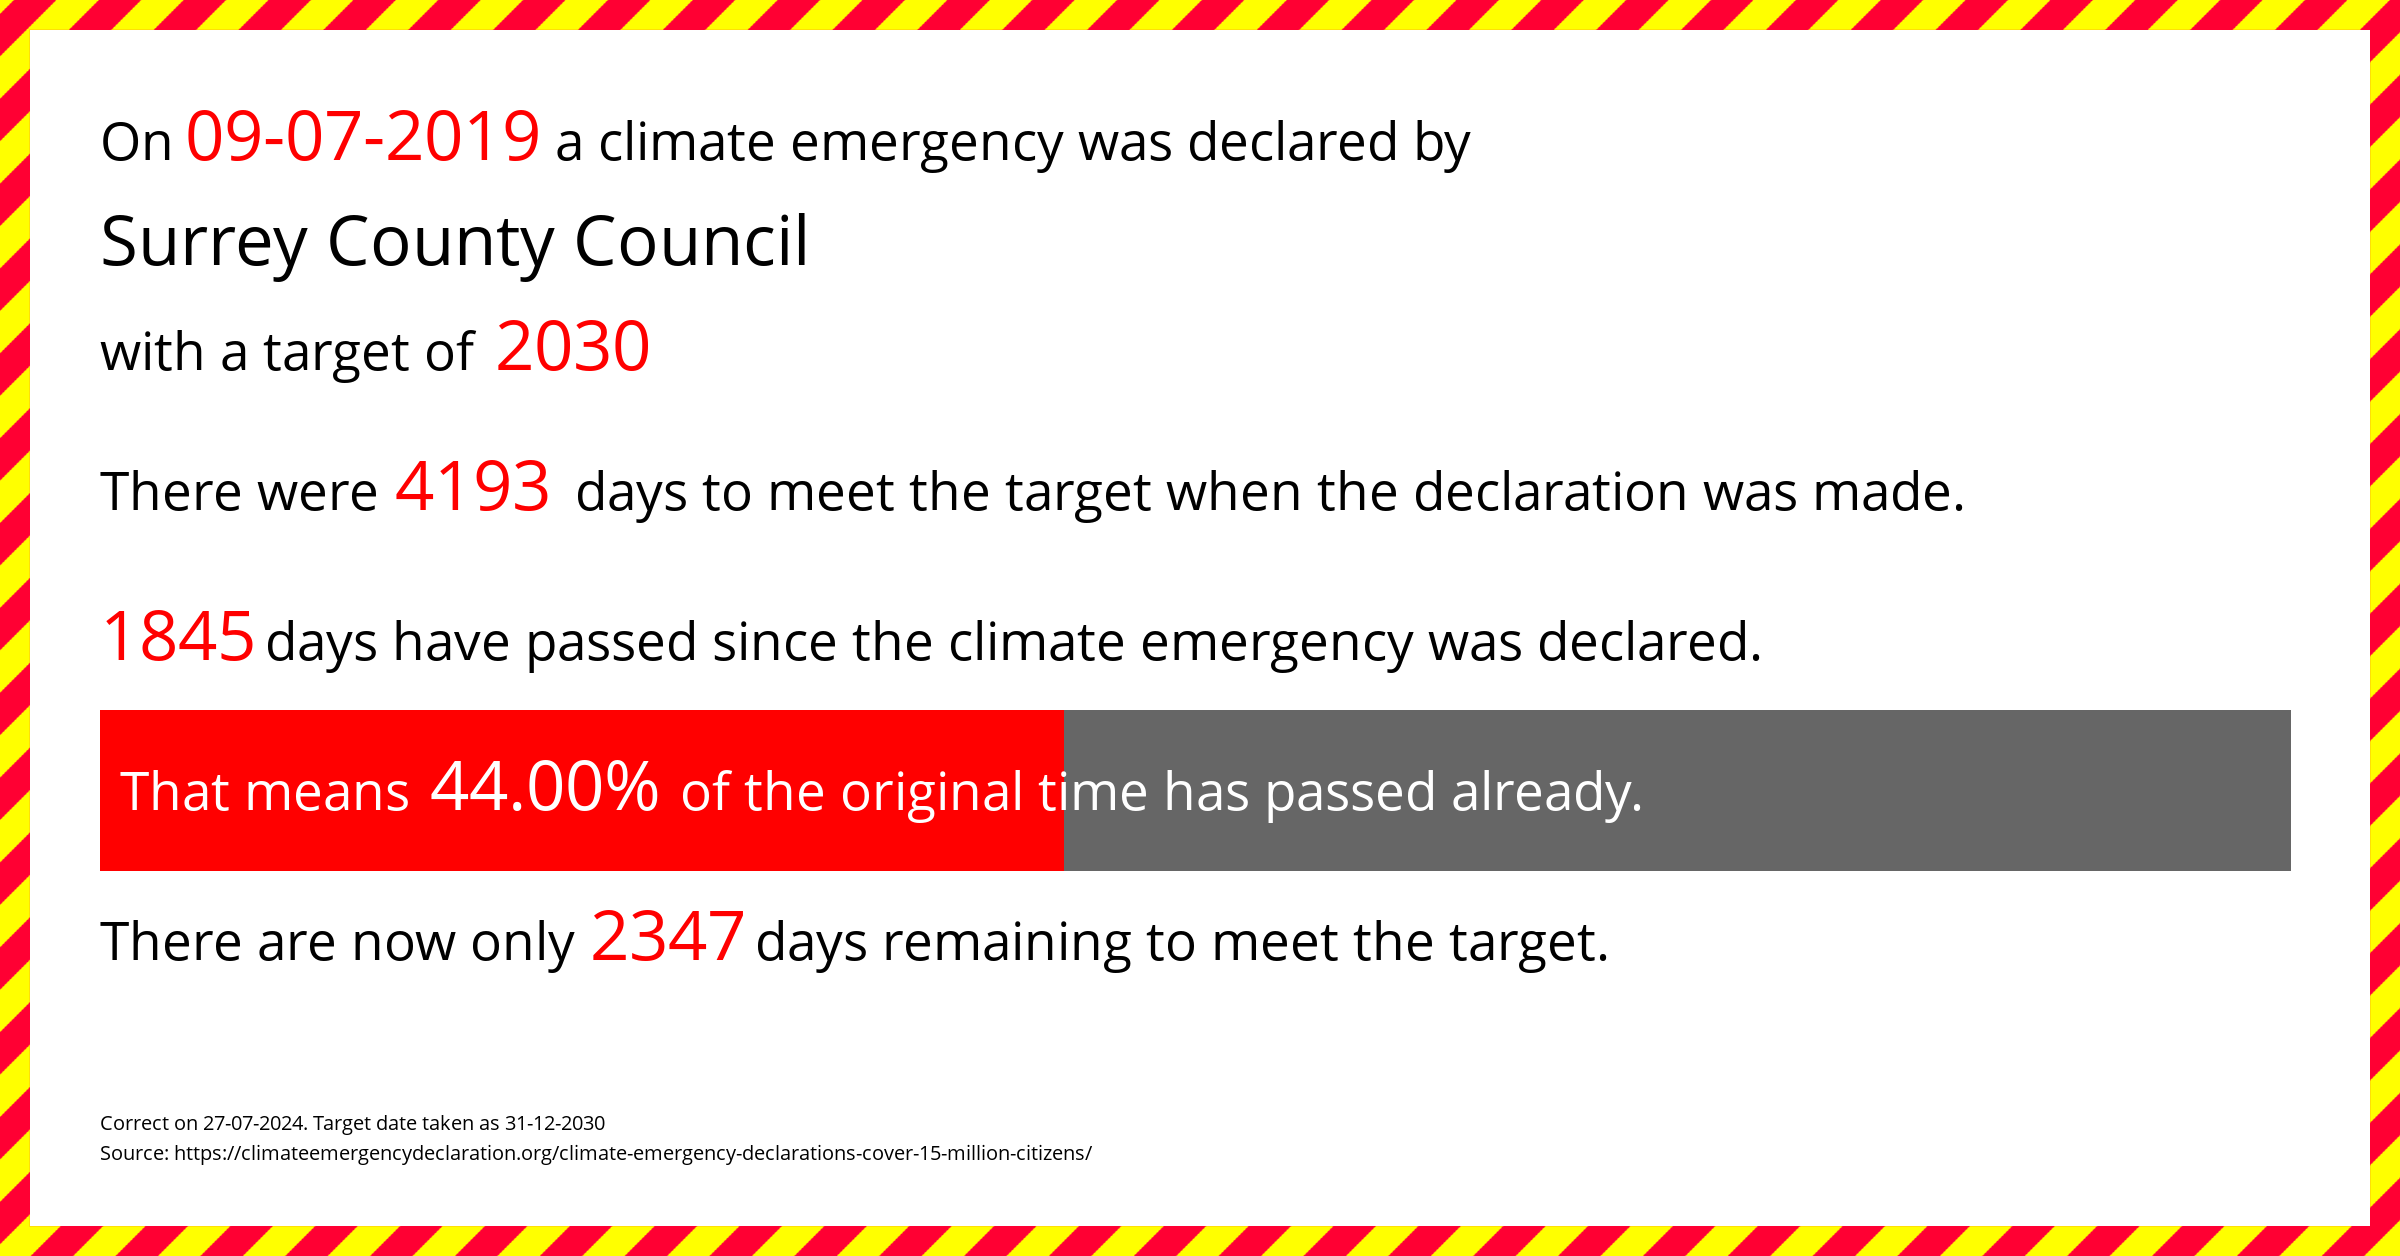 Surrey County Council declared a Climate emergency on Tuesday 9th July 2019, with a target of 2030.